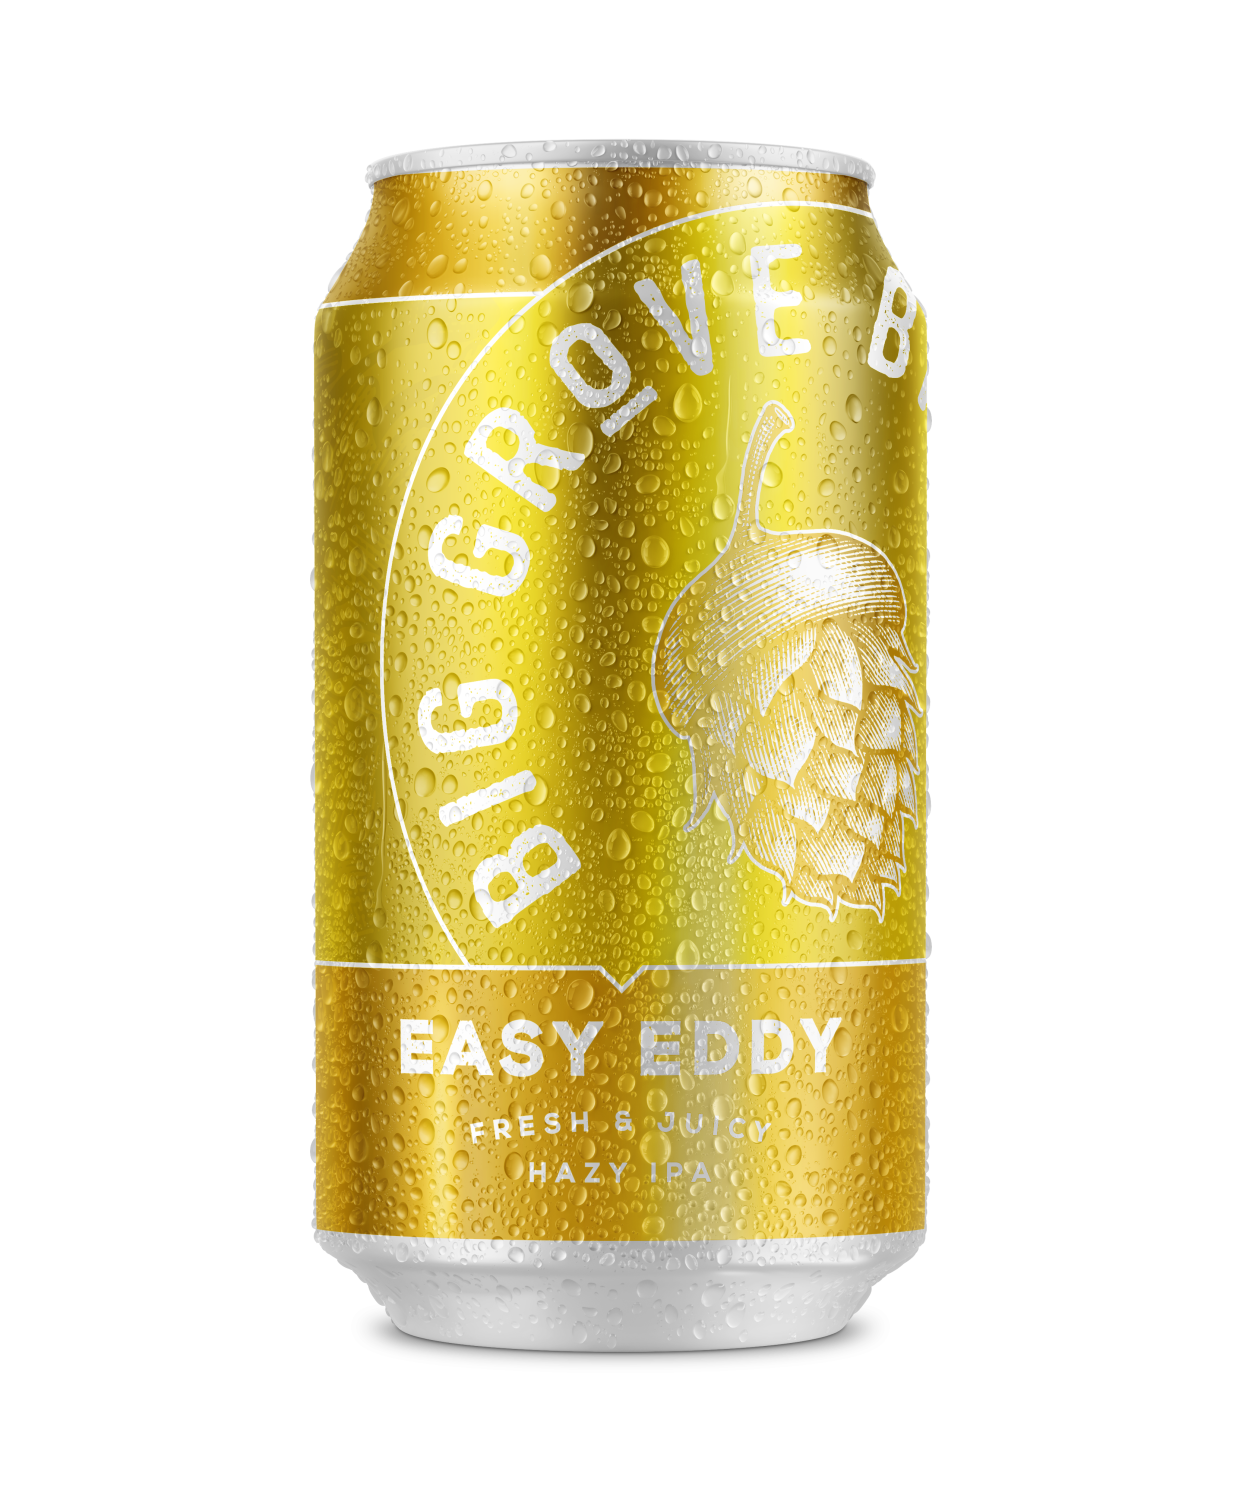 RAGBRAI riders can win a gold jersey by finding a gold can of Big Grove Brewery's Easy Eddy Hazy IPA.